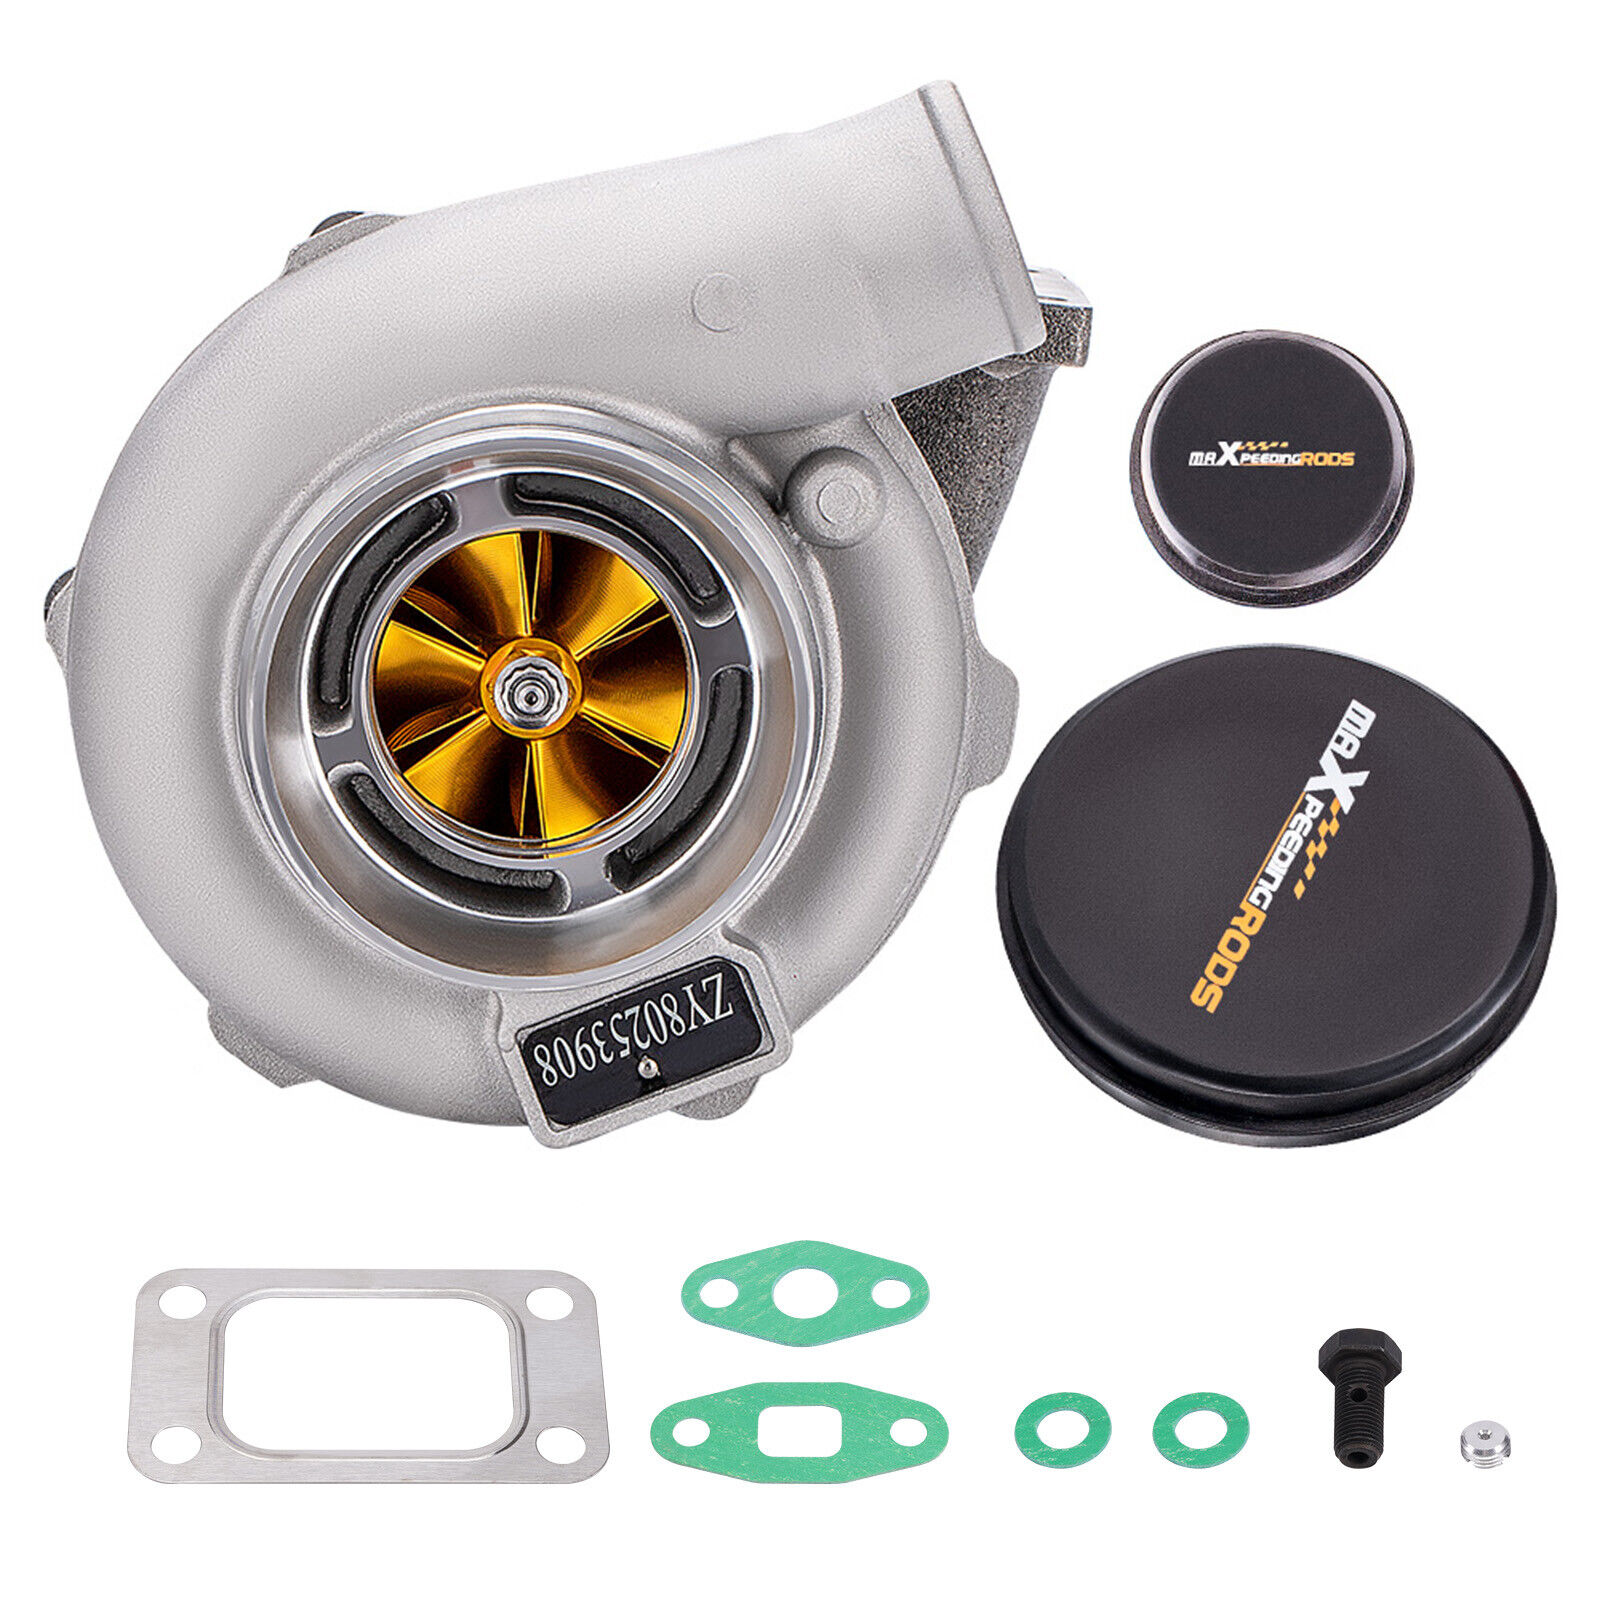 GT3076 GT3037 GT30 T3 Flange A/R .60 anti-surge universal Turbo Charger 500BHP